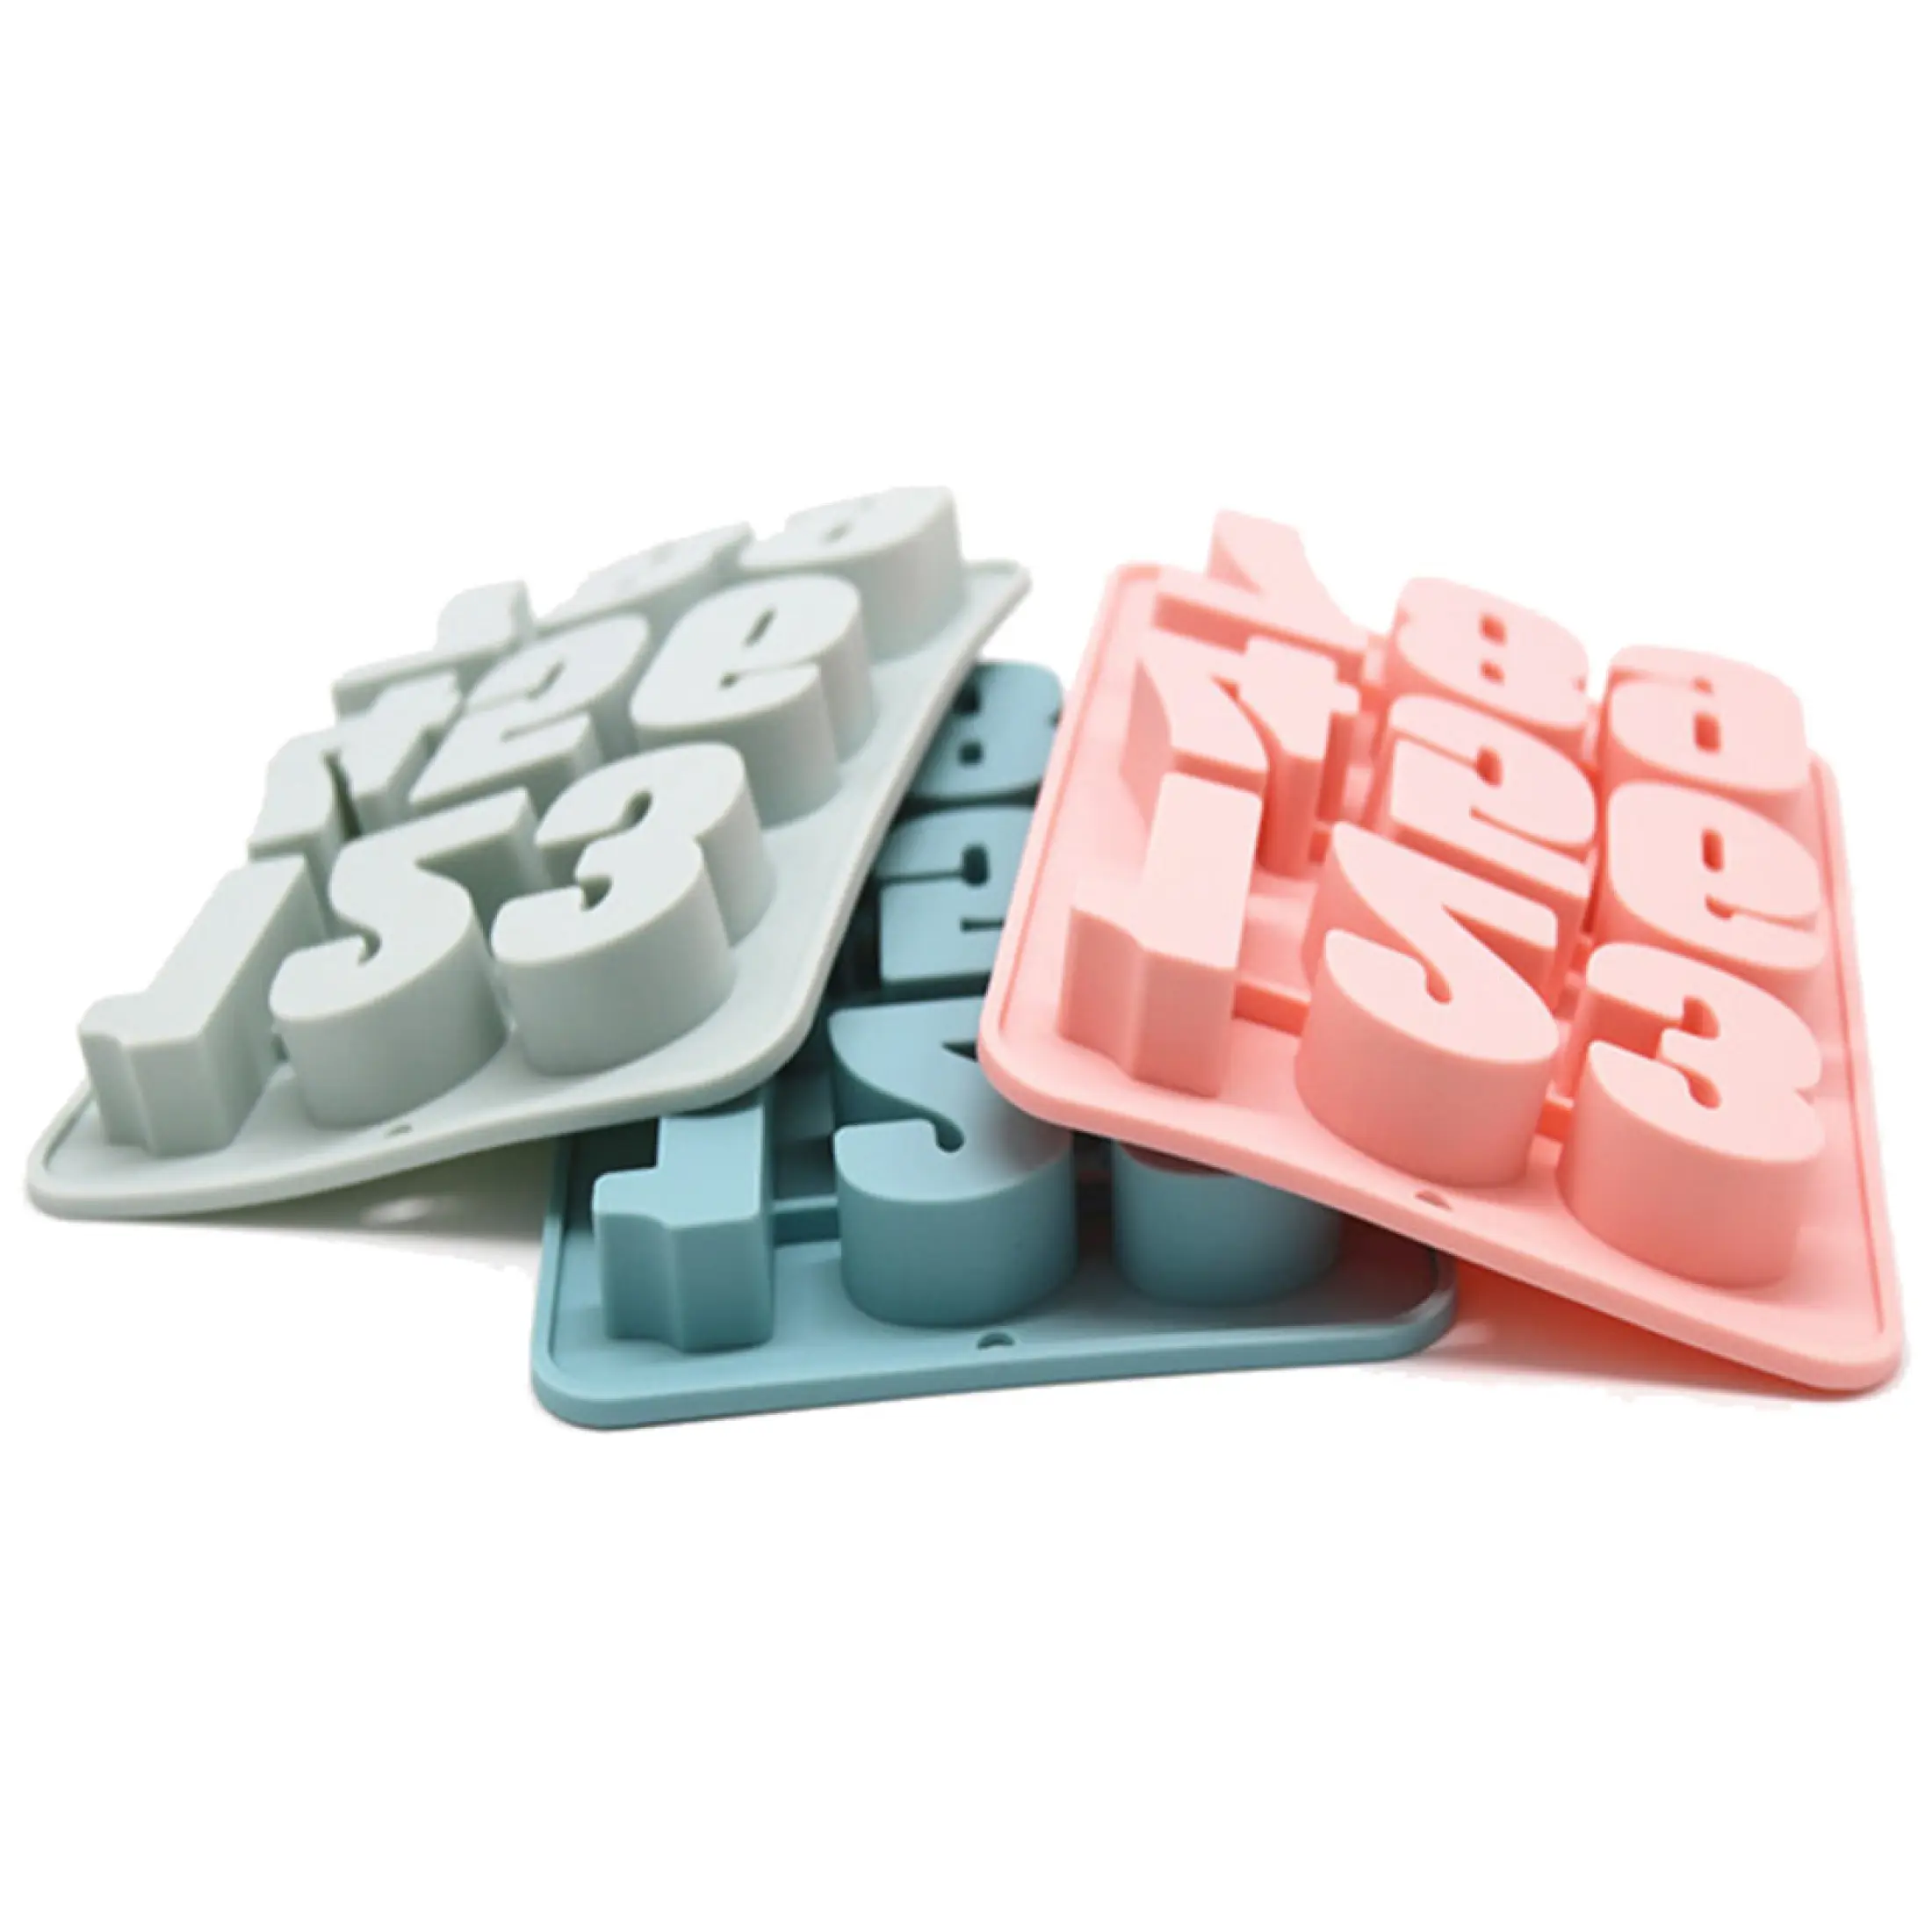 1-9 Number Silicone Ice Mold 3D DIY Fondant Cake Mold Ice Cube Maker Mold Baking